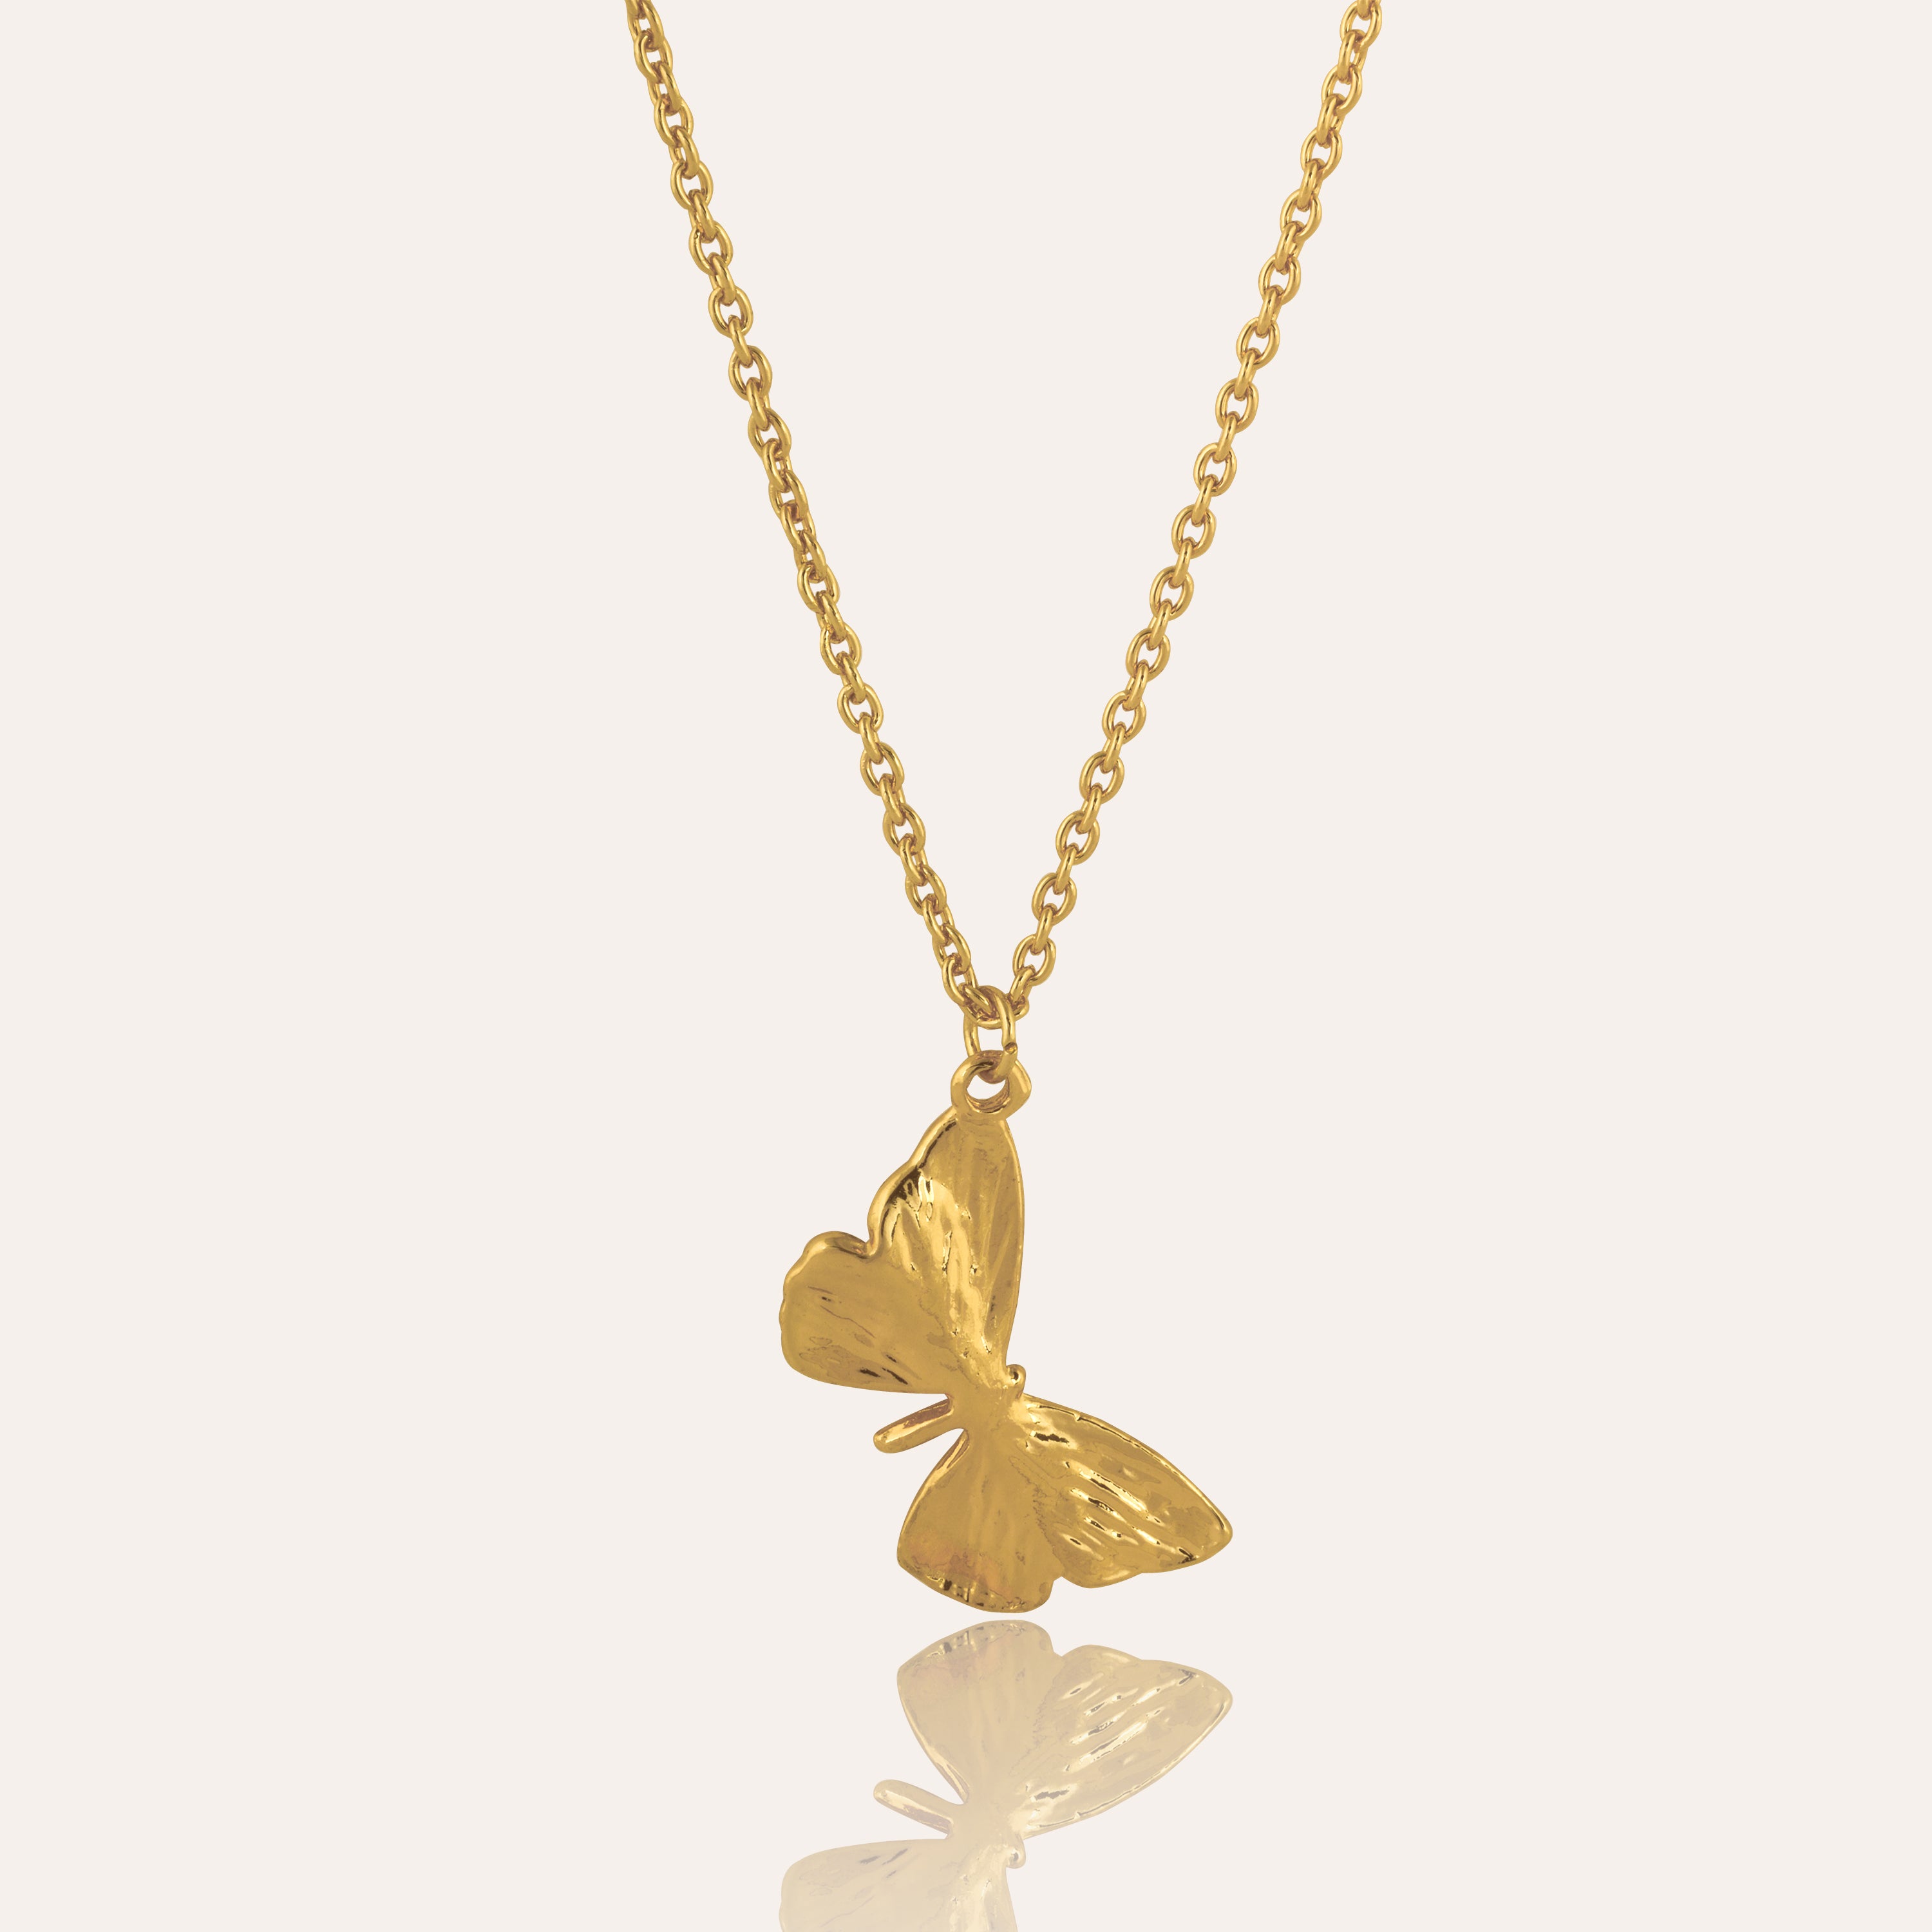 TFC Lucky Butterfly Plated Necklace-Enhance your elegance with our collection of gold-plated necklaces for women. Choose from stunning pendant necklaces, chic choker necklaces, and trendy layered necklaces. Our sleek and dainty designs are both affordable and anti-tarnish, ensuring lasting beauty. Enjoy the cheapest fashion jewellery, lightweight and stylish- only at The Fun Company